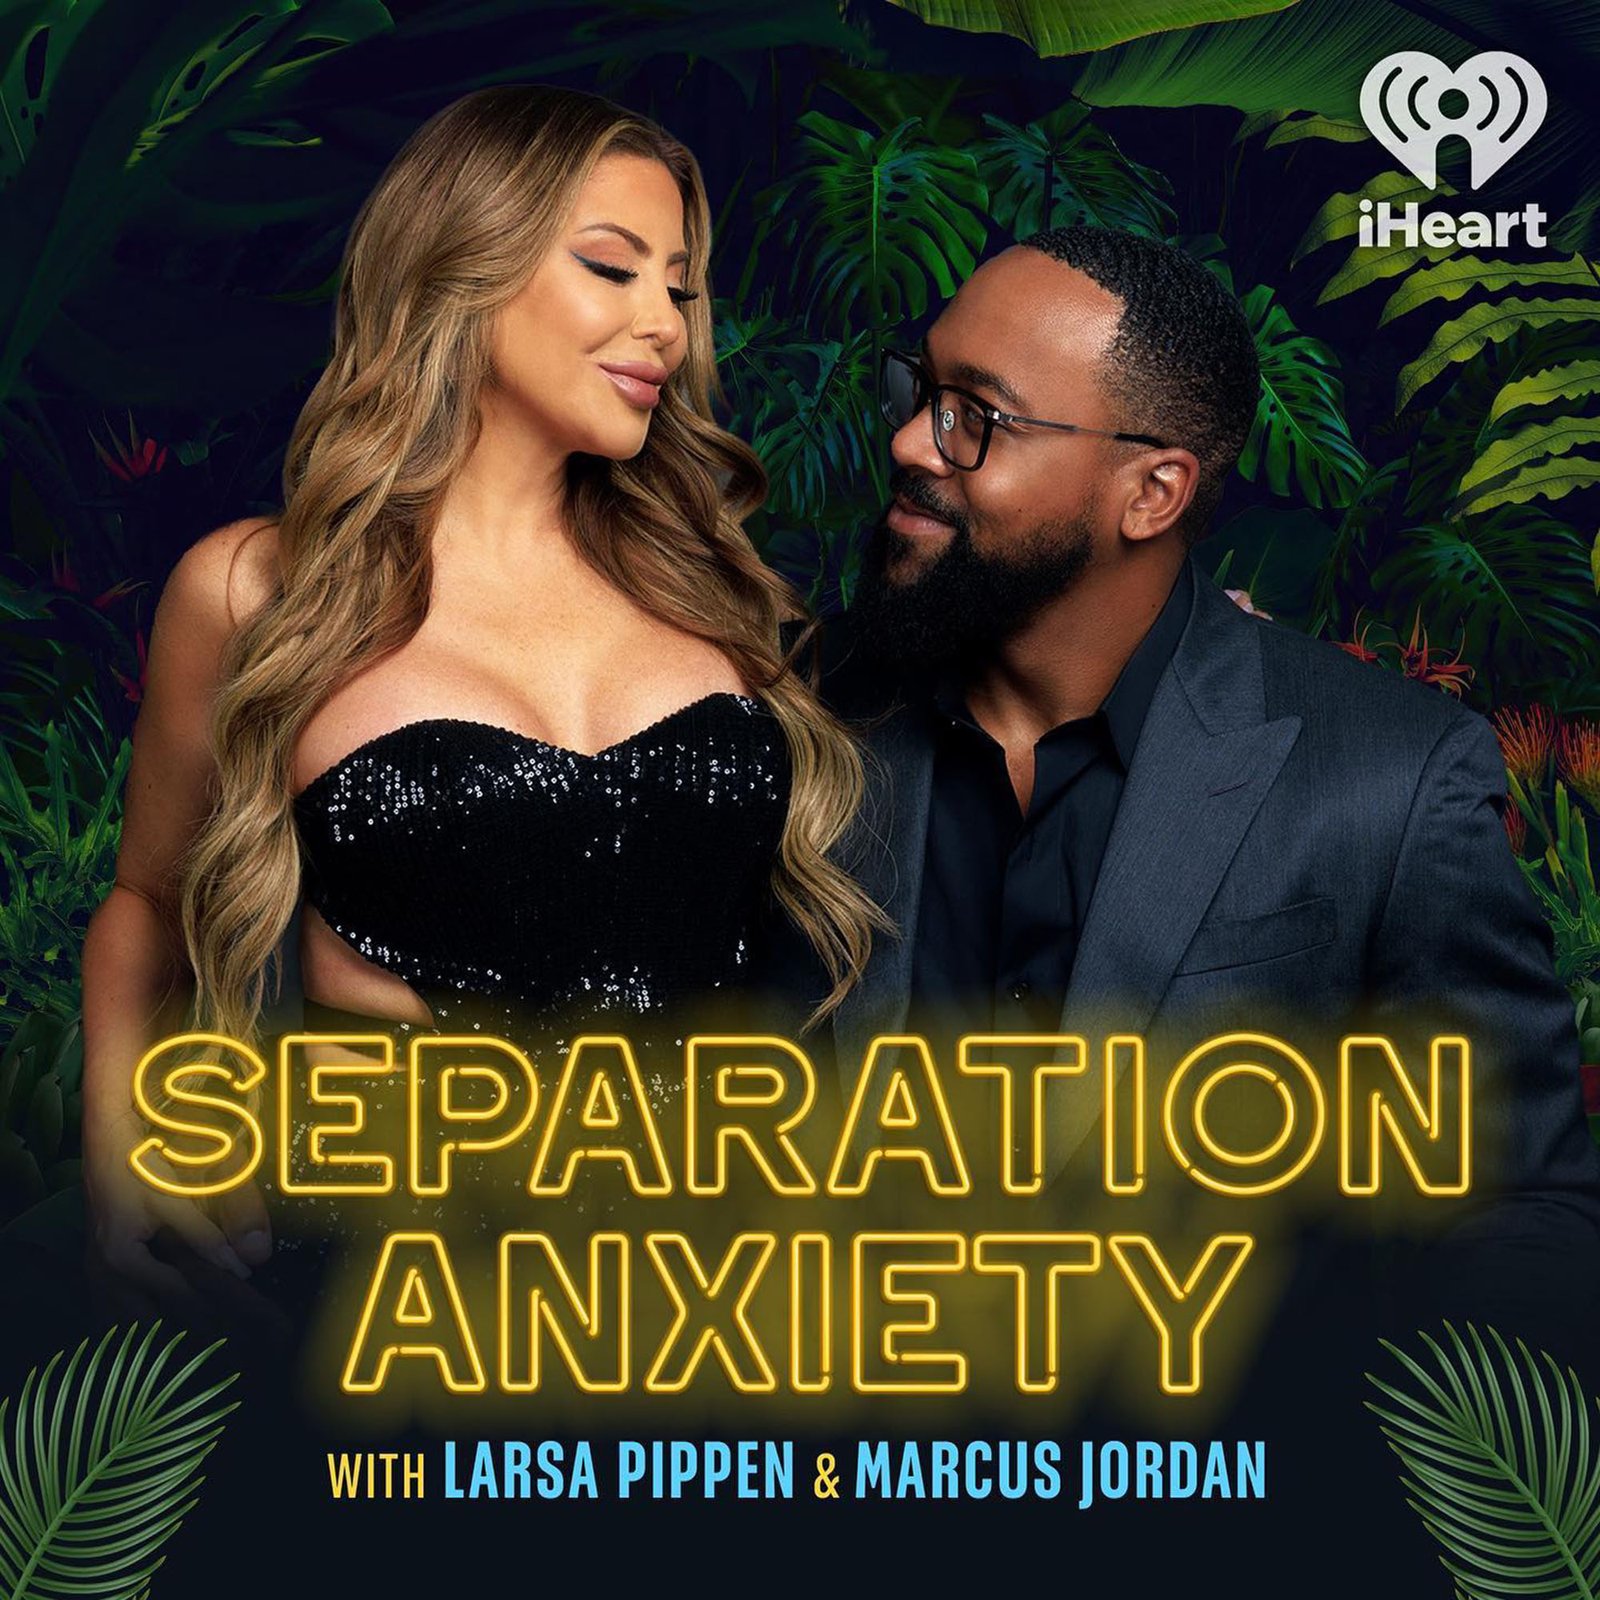 Larsa Pippen and Marcus Jordan "Separation Anxiety" podcast art